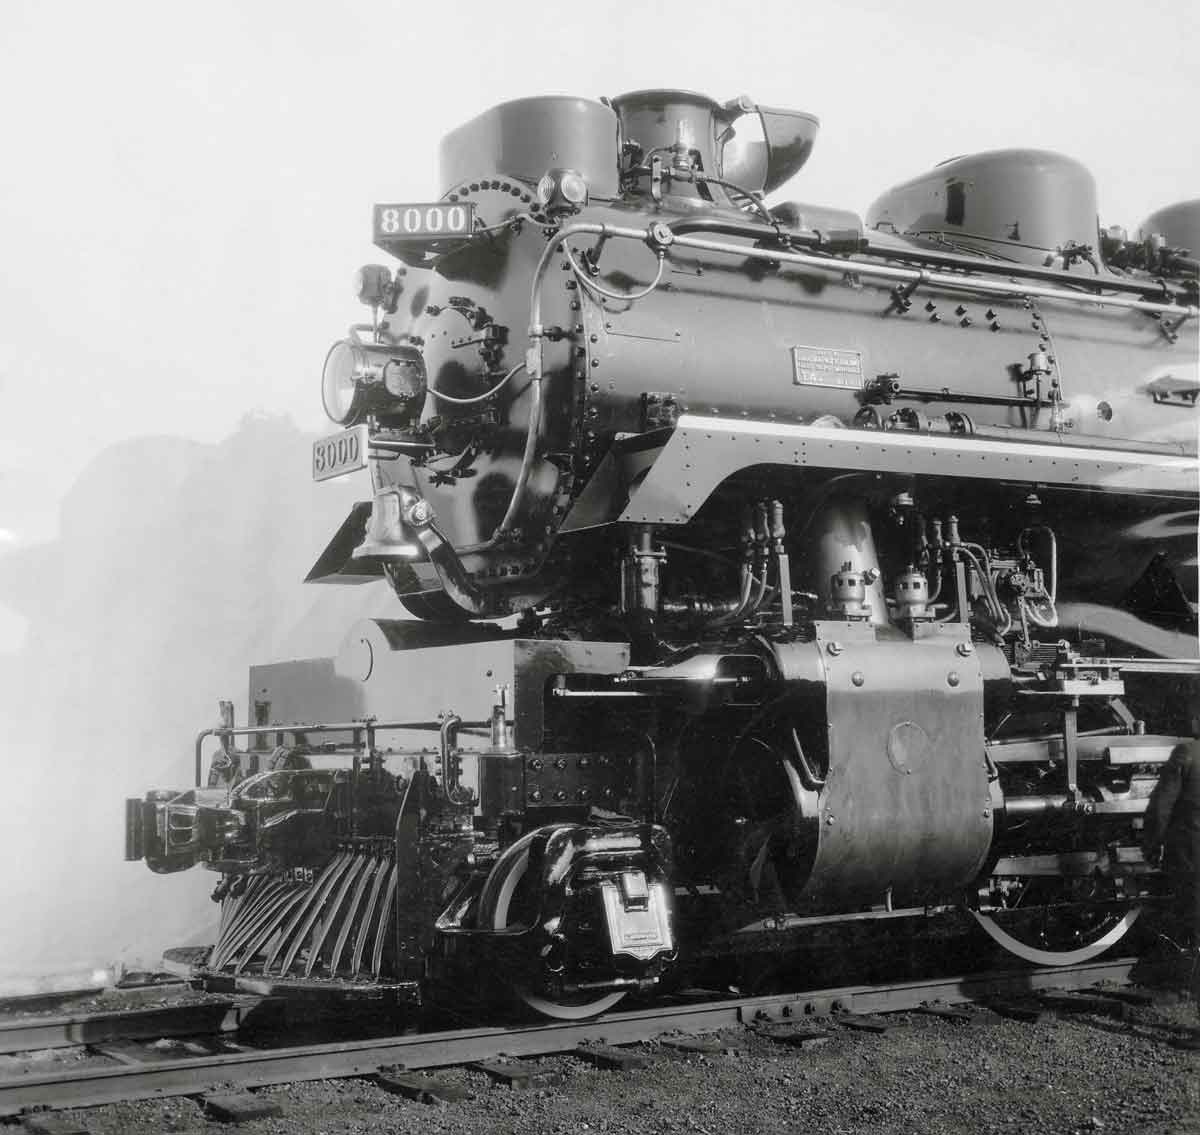 Canadian Pacific Class T4a No. 8000